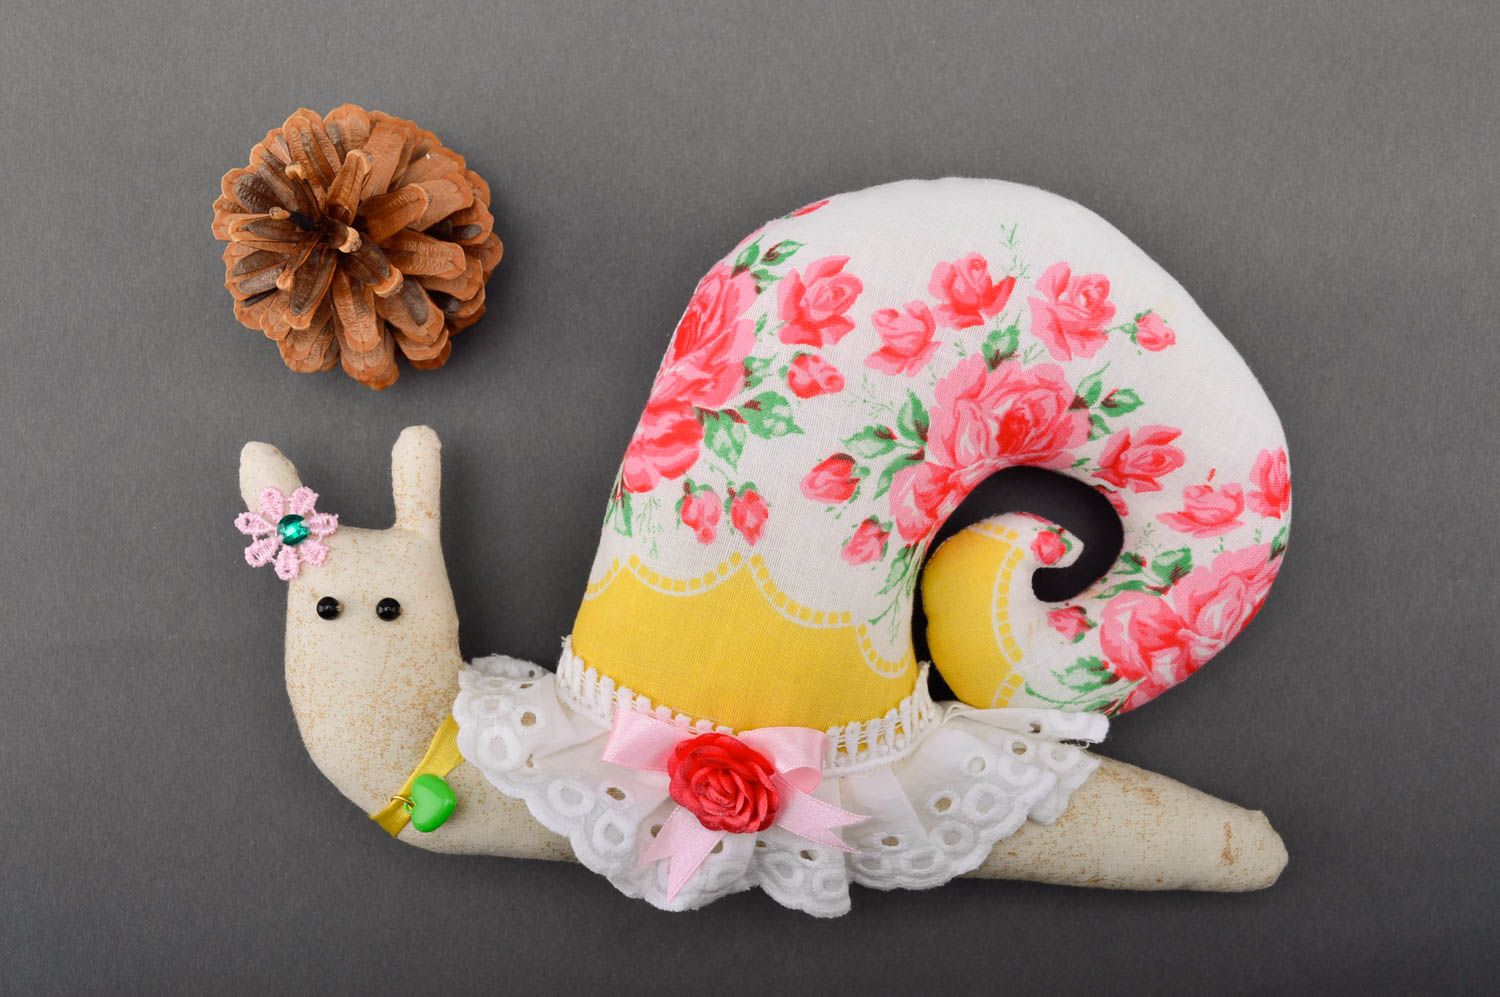 Soft toy handmade toy animal snail toy birthday gifts for kids home decor photo 1